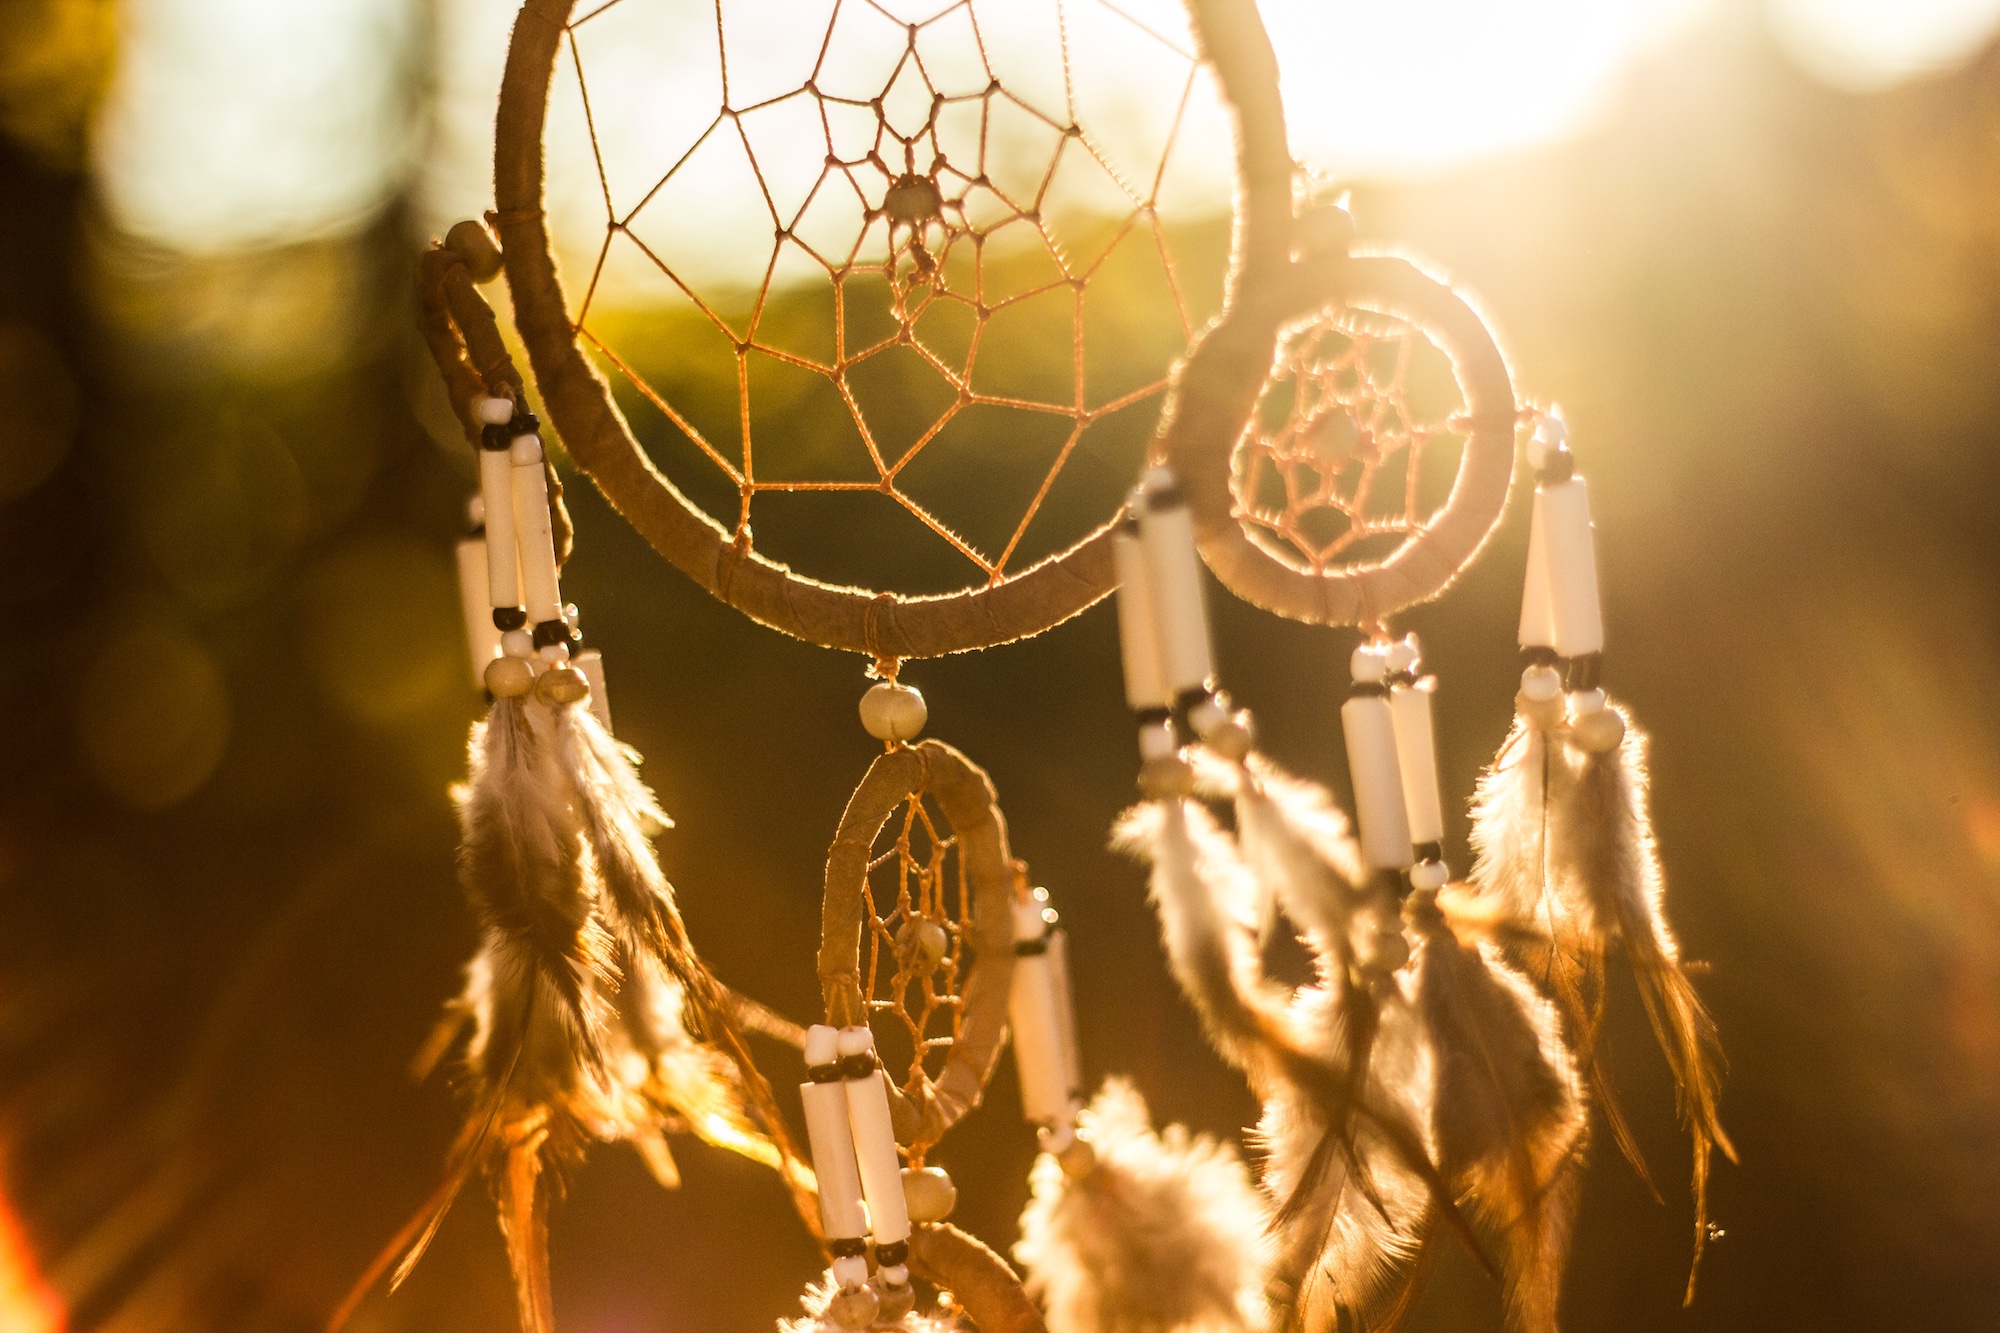 Dreamcatcher hanging outside in front of a bright sunset.